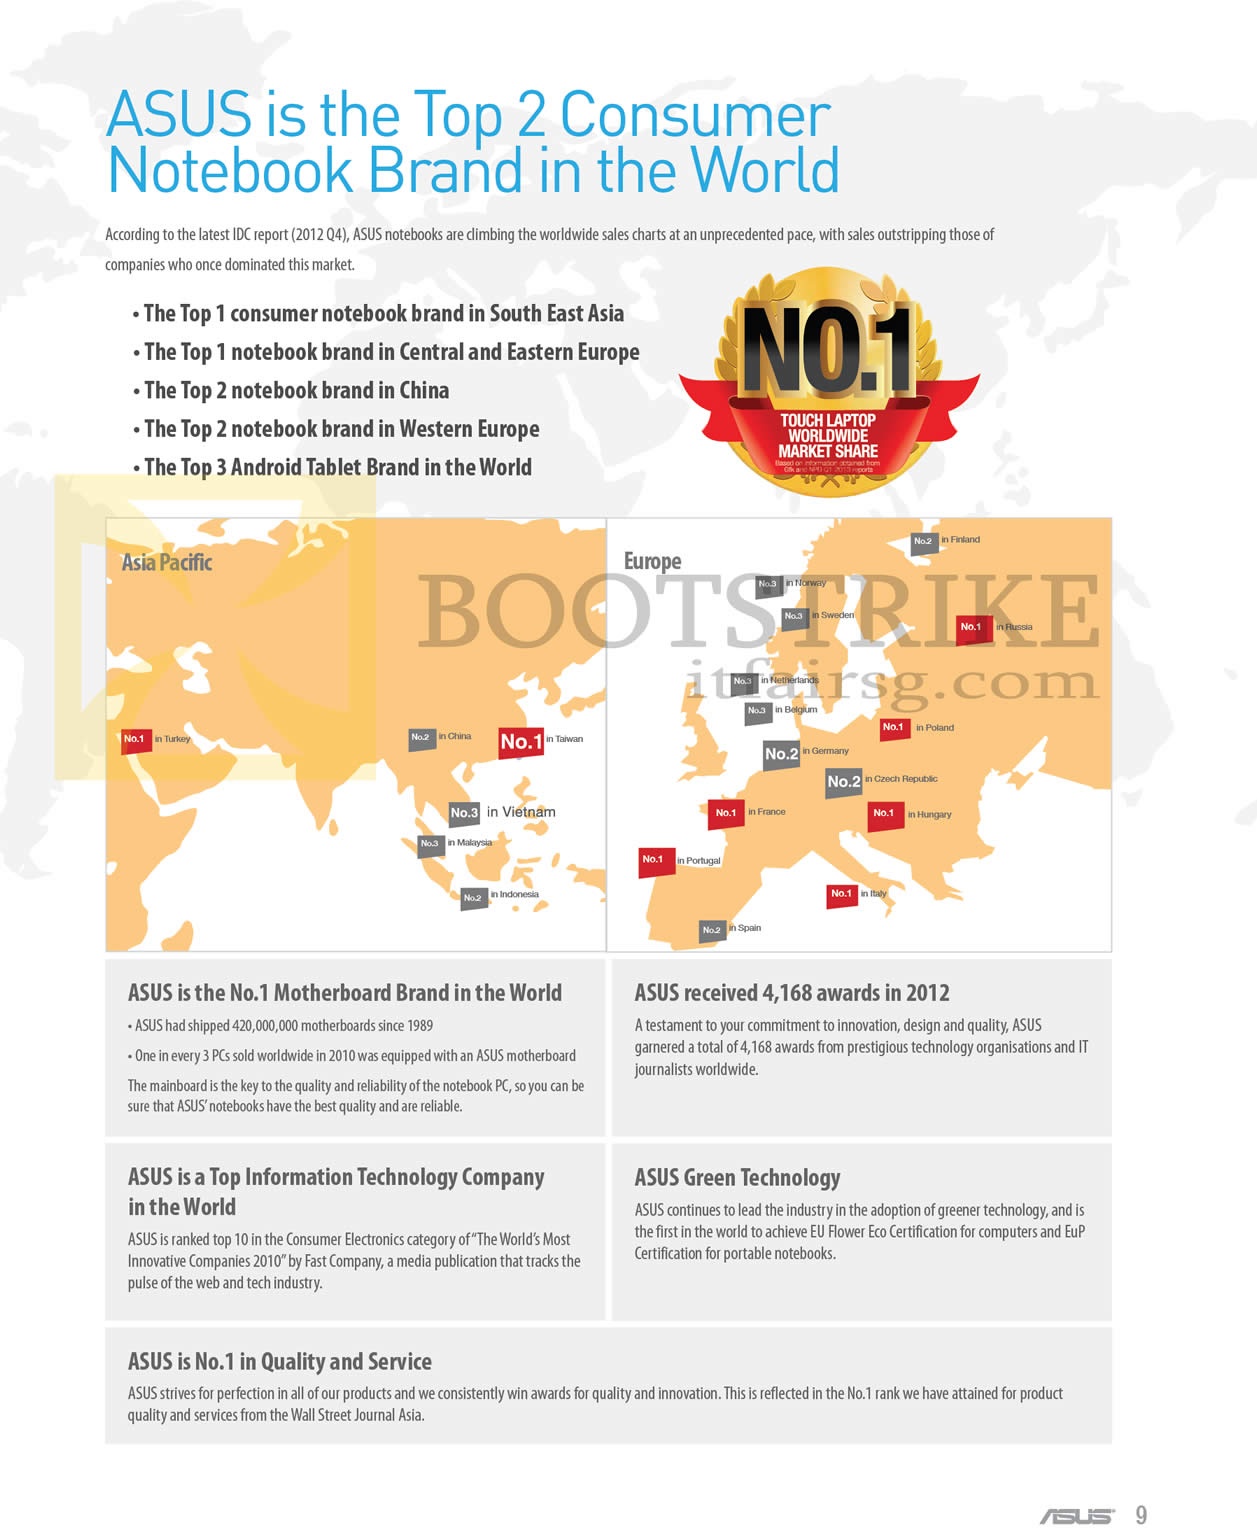 PC SHOW 2013 price list image brochure of ASUS Notebooks Top Notebook Brand Globally